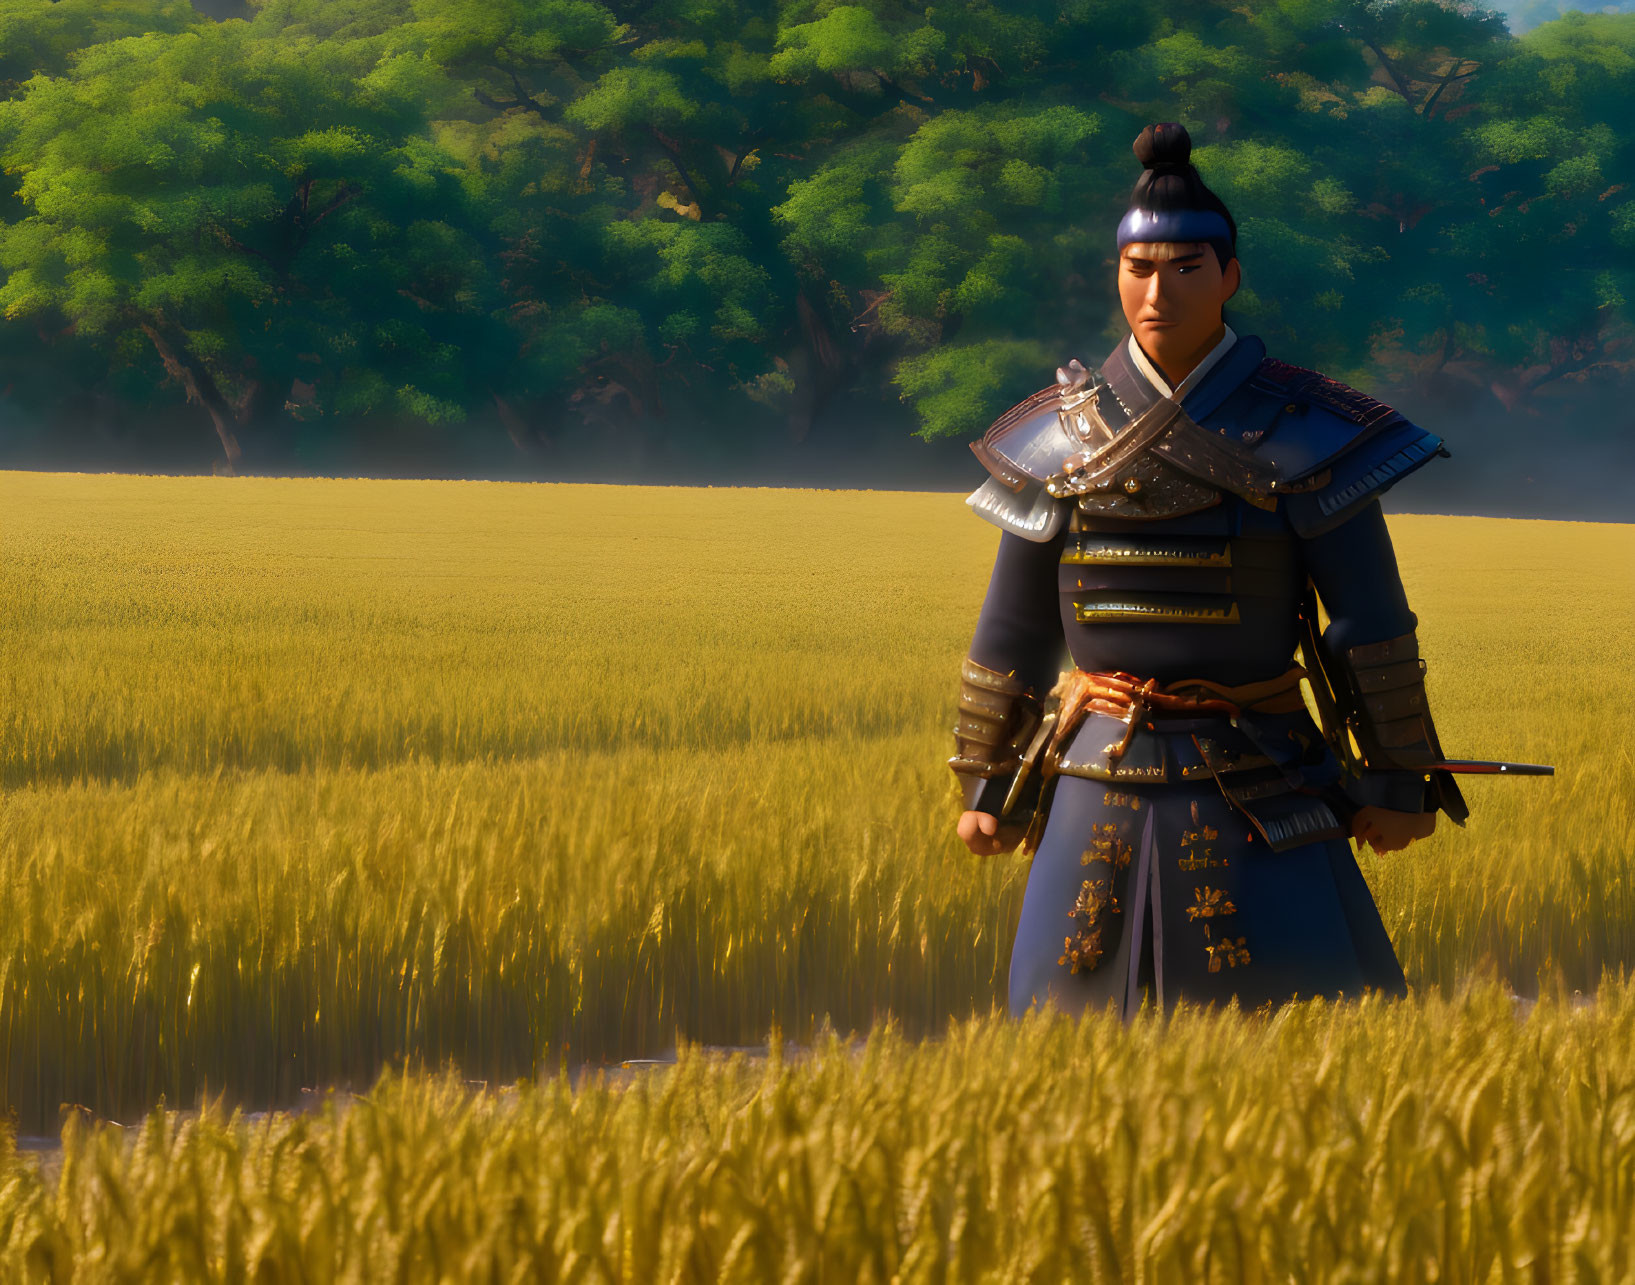 Traditional armored warrior in golden field with dense trees - historical or fantasy setting